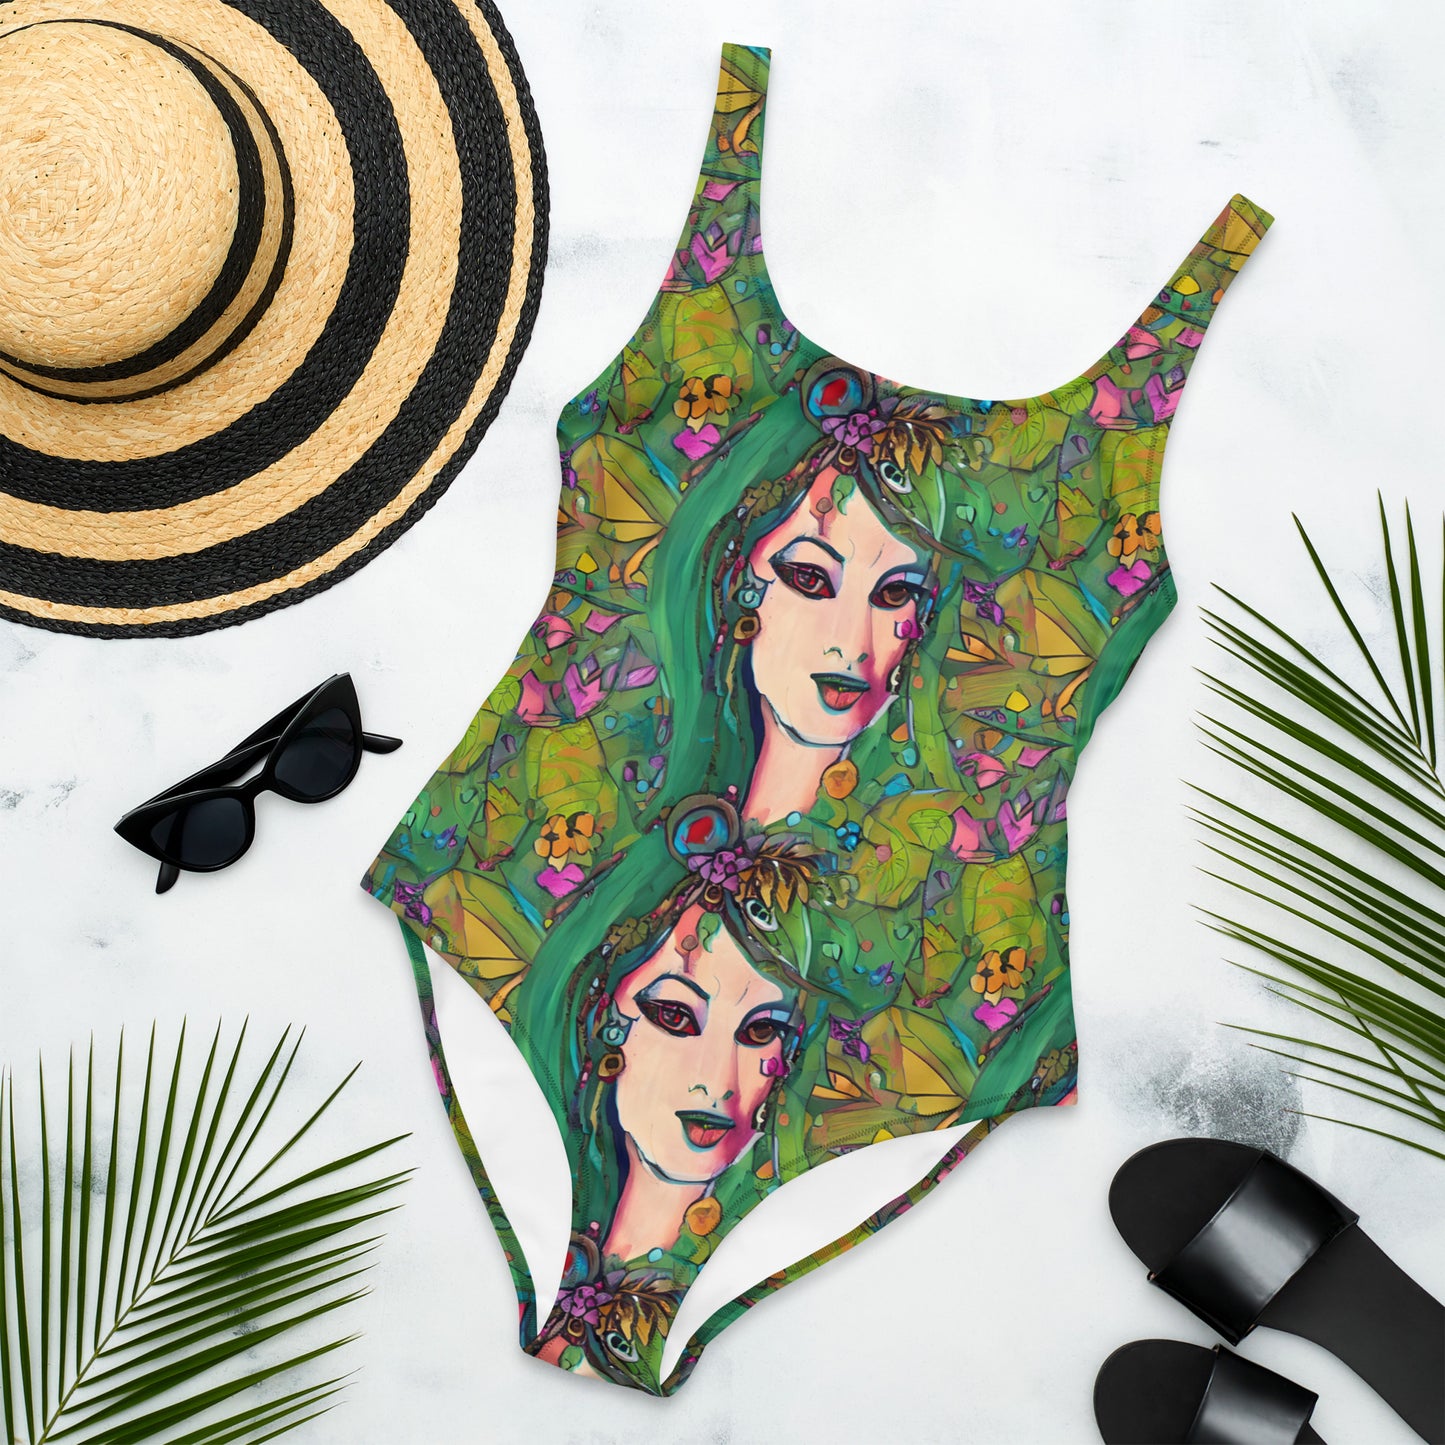 Introducing the Adelaide Green Goddess One-Piece Swimsuit by Chameleon Surf Brand! Dive into summer style with this chic and eco-friendly swimsuit. Made for the modern goddess who embraces both fashion and sustainability. Get ready to make a splash and stand out on the beach or by the pool. Shop now and channel your inner beach babe #SummerStyle #ChameleonSurf #GreenGoddessSwimsuit #greenswimsuit #greenbathingsuit #cheekyswimsuit